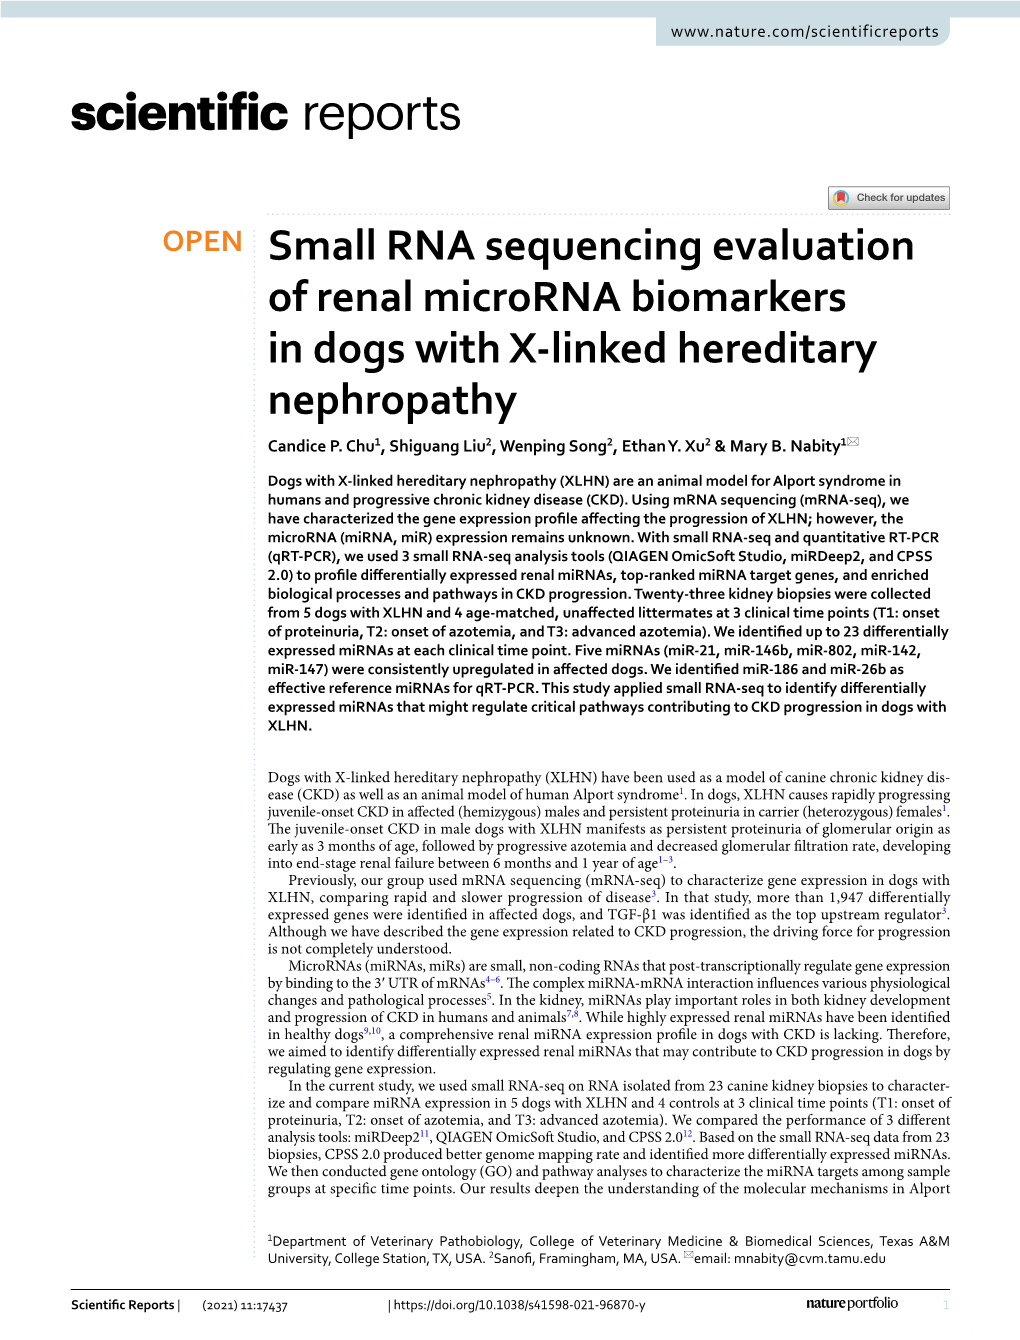 Small RNA Sequencing Evaluation of Renal Microrna Biomarkers in Dogs with X‑Linked Hereditary Nephropathy Candice P